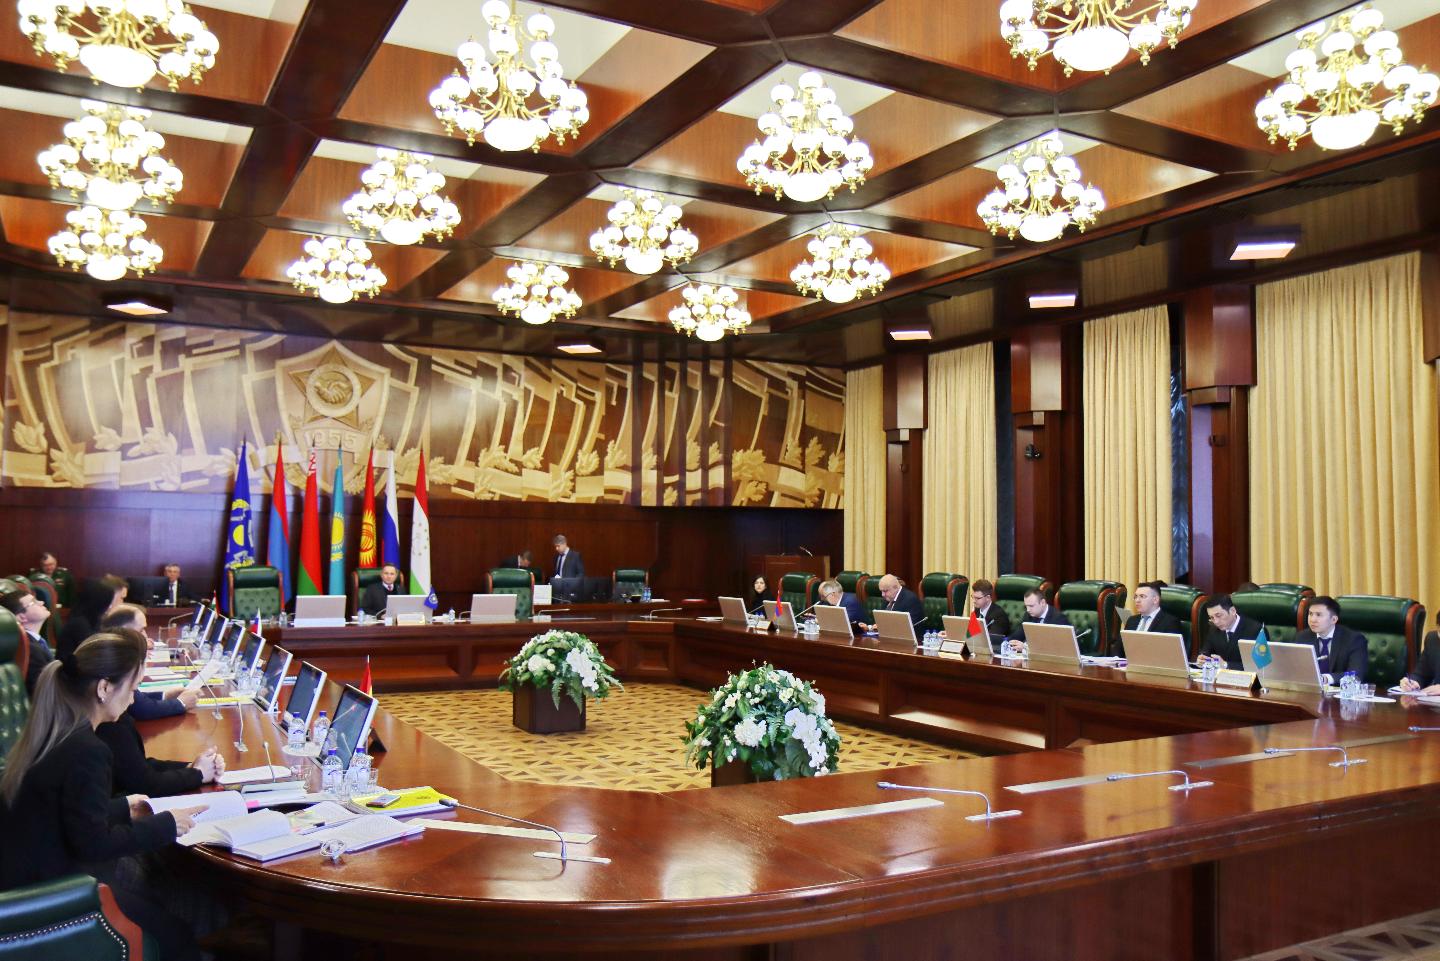 On April 20-21, 2022, the CSTO Joint Staff held a meeting of the Working Group on Military-Economic Cooperation under the Chairman of the CSTO Interstate Commission on Military-Economic Cooperation